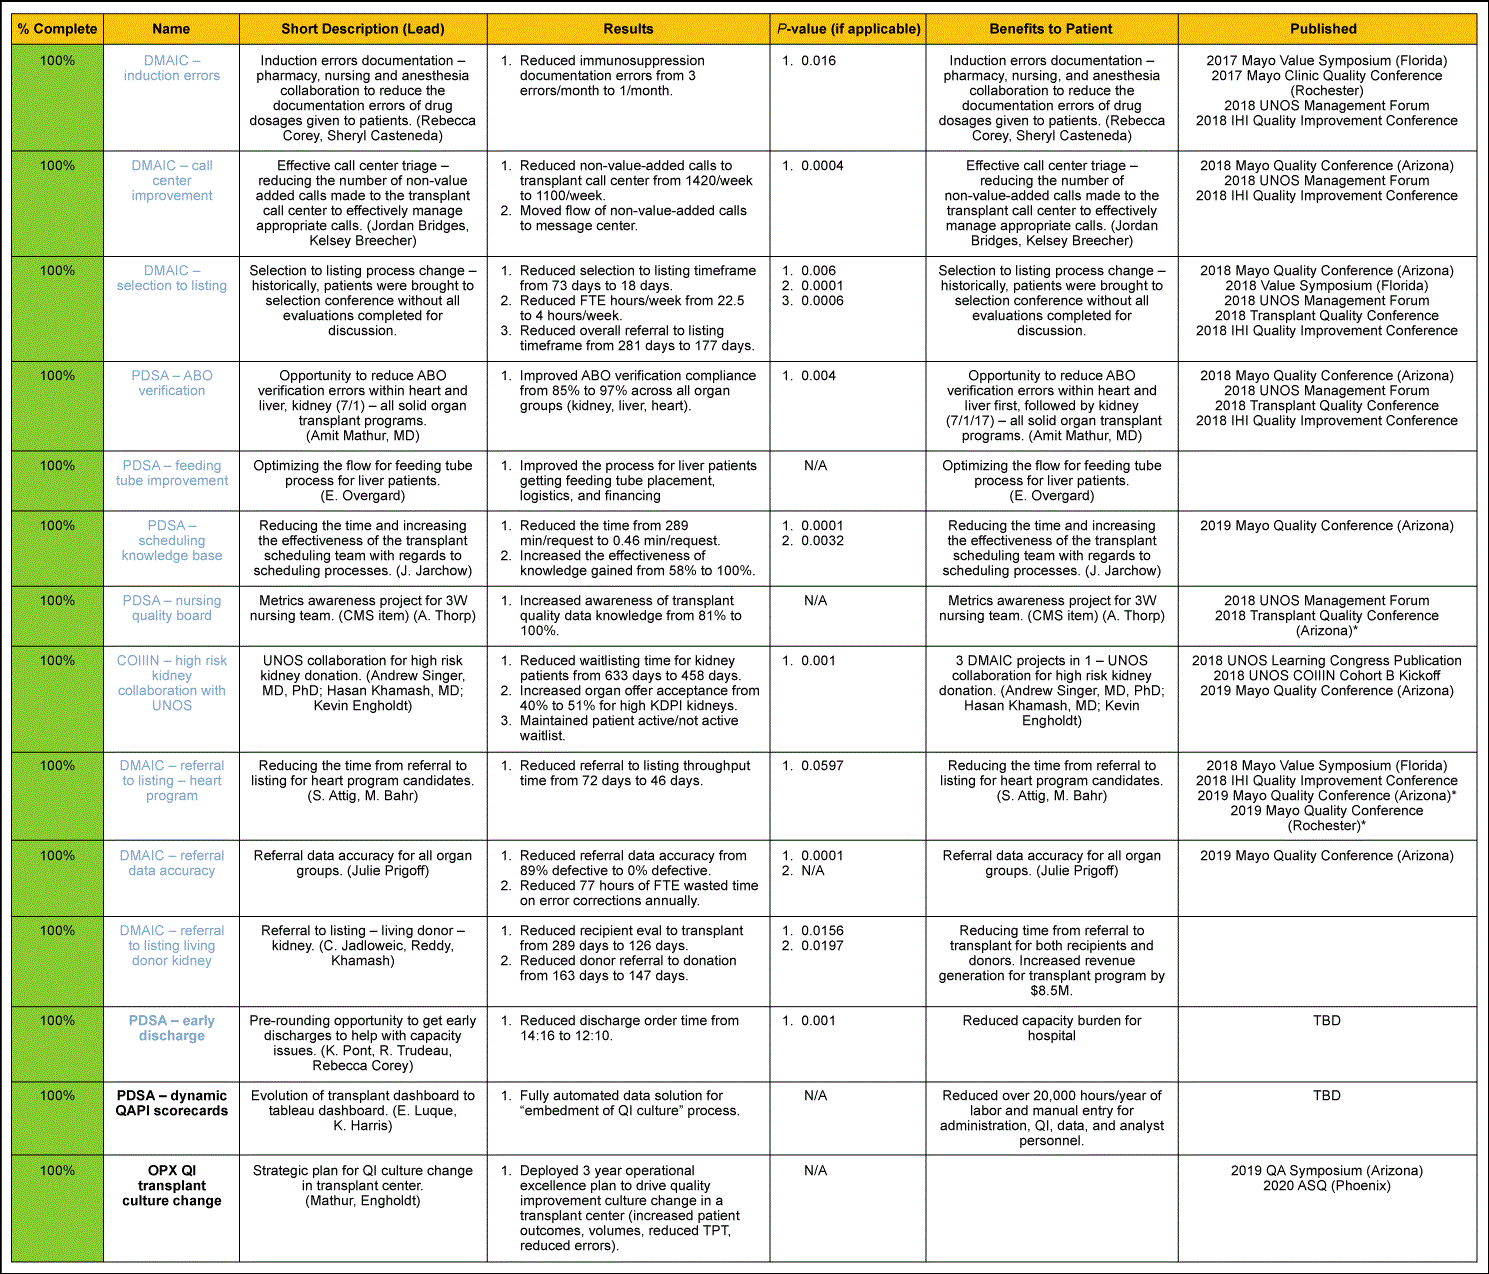 Table 2: Detailed Outcome Summaries (Click to Enlarge)